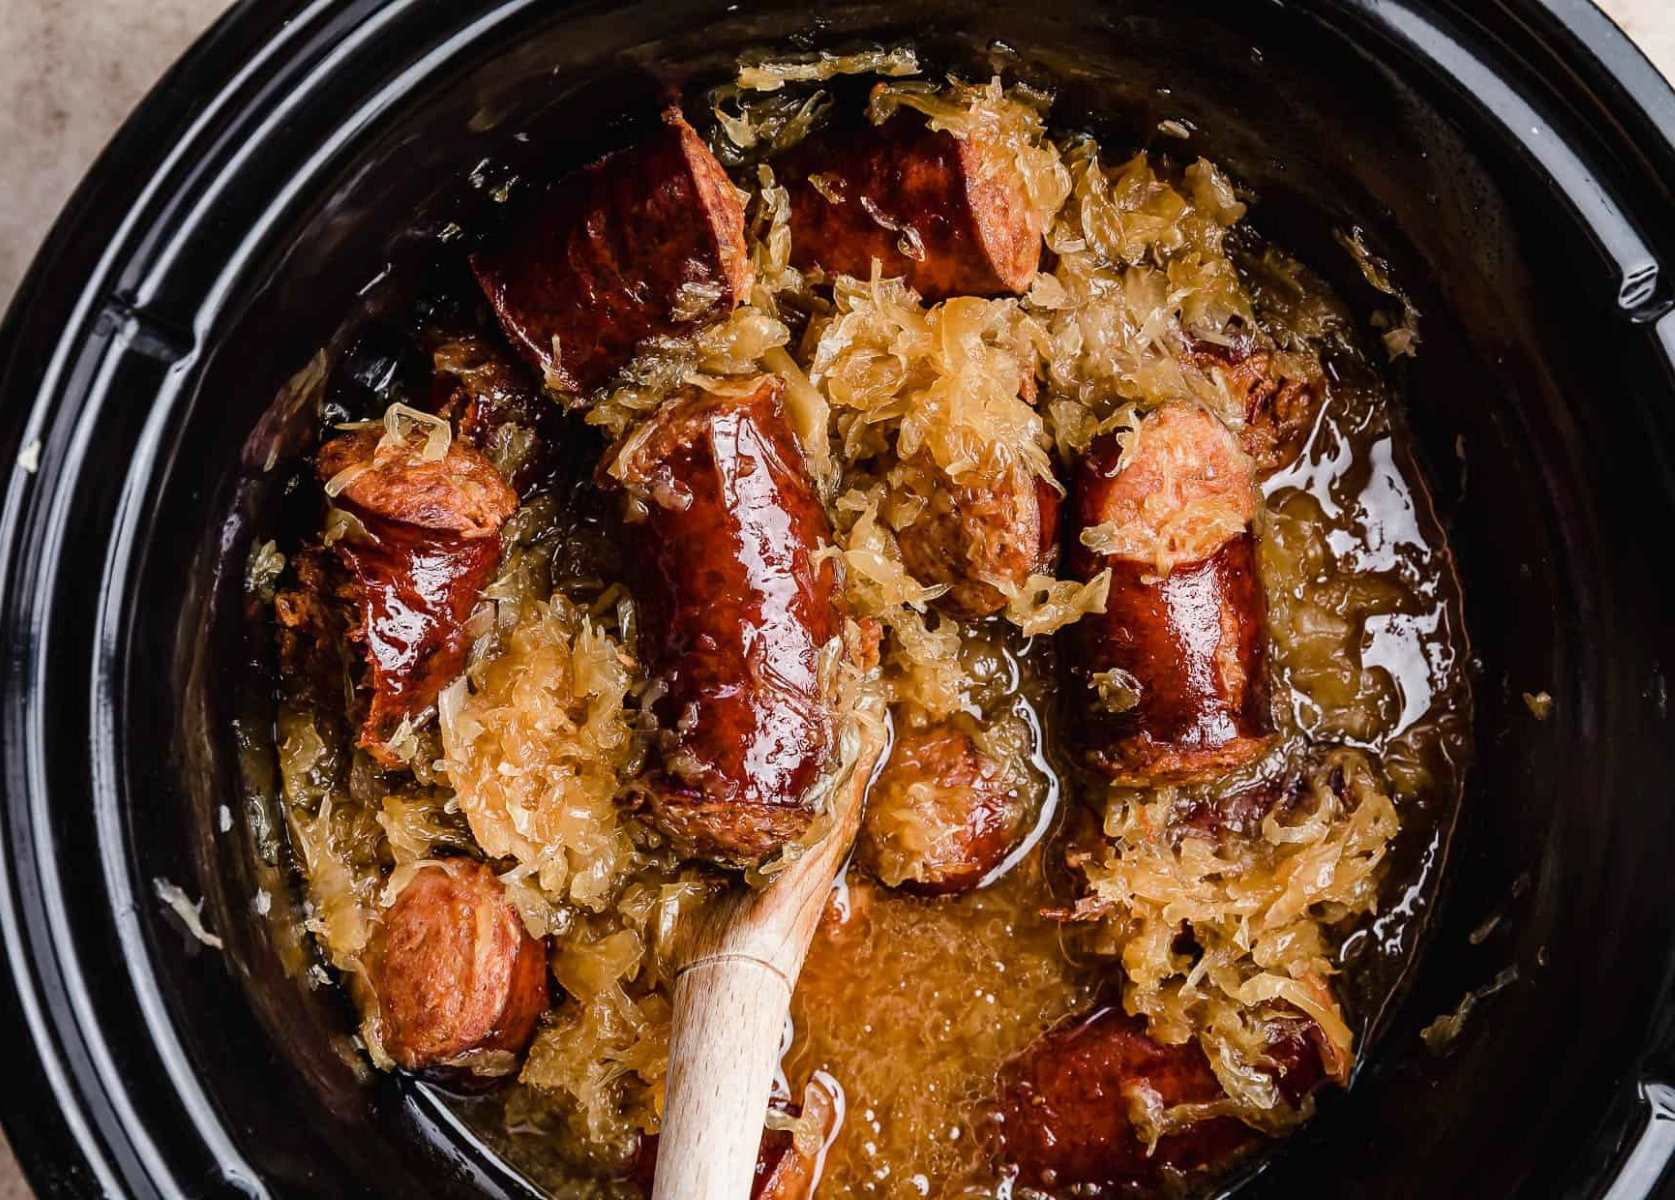 Delicious Slow Cooker Kielbasa Sauerkraut With Apples For Easy Meal Prep